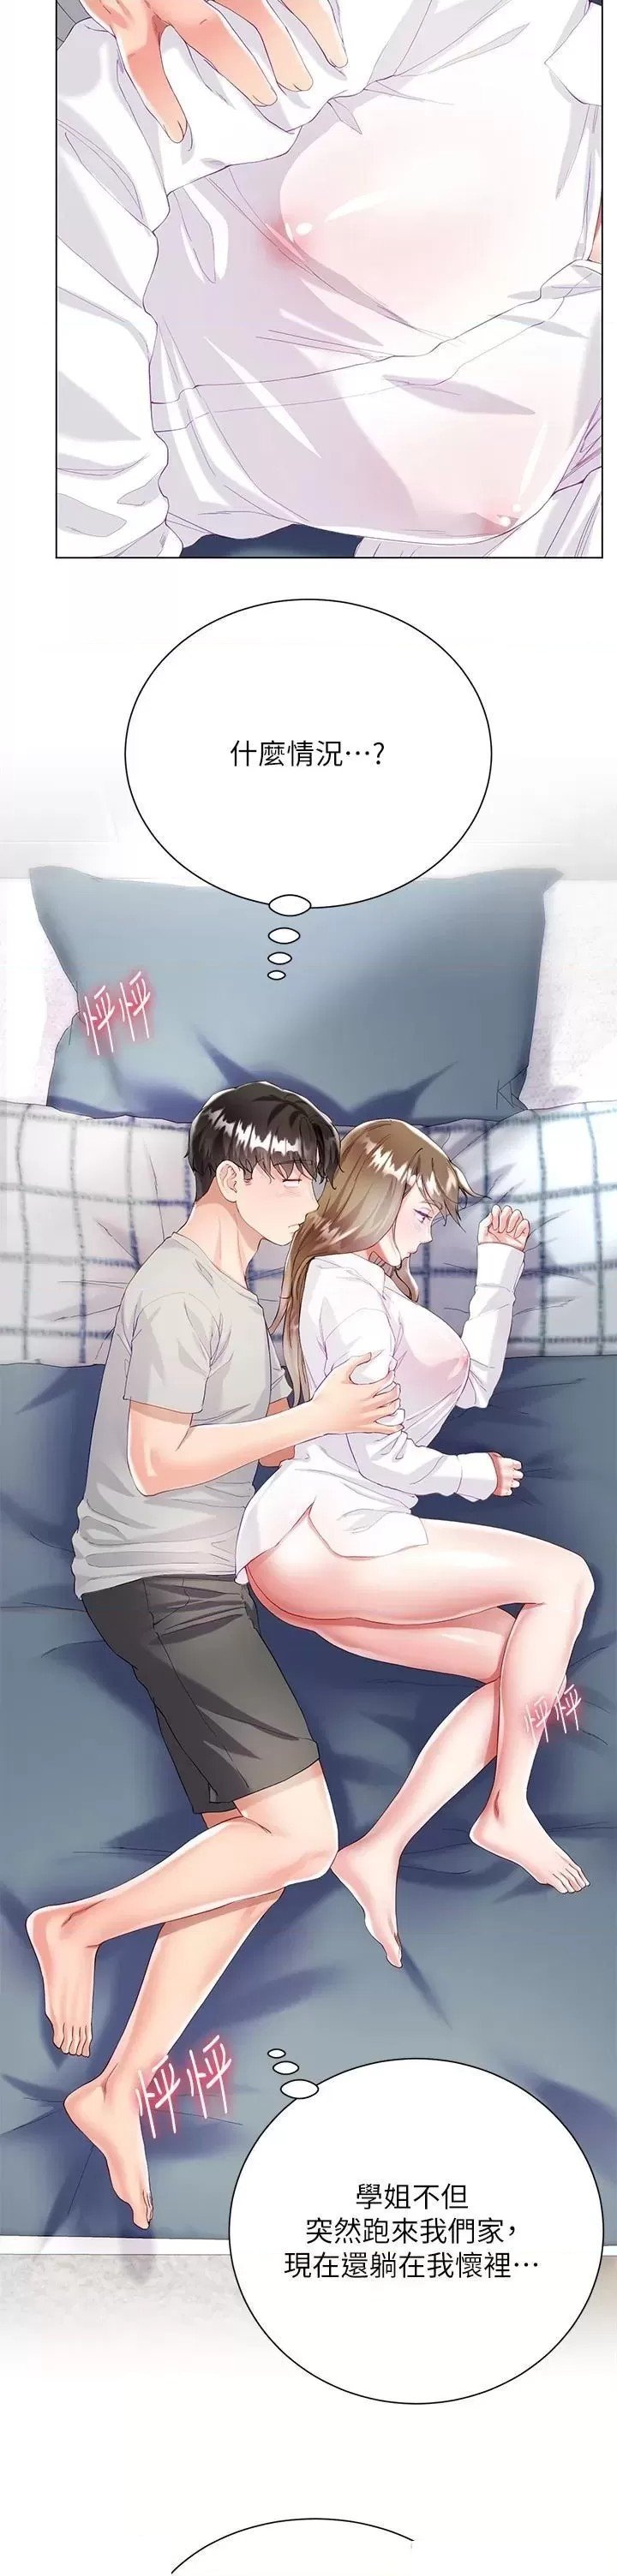 skirt-of-brothers-wife-raw-chap-30-19